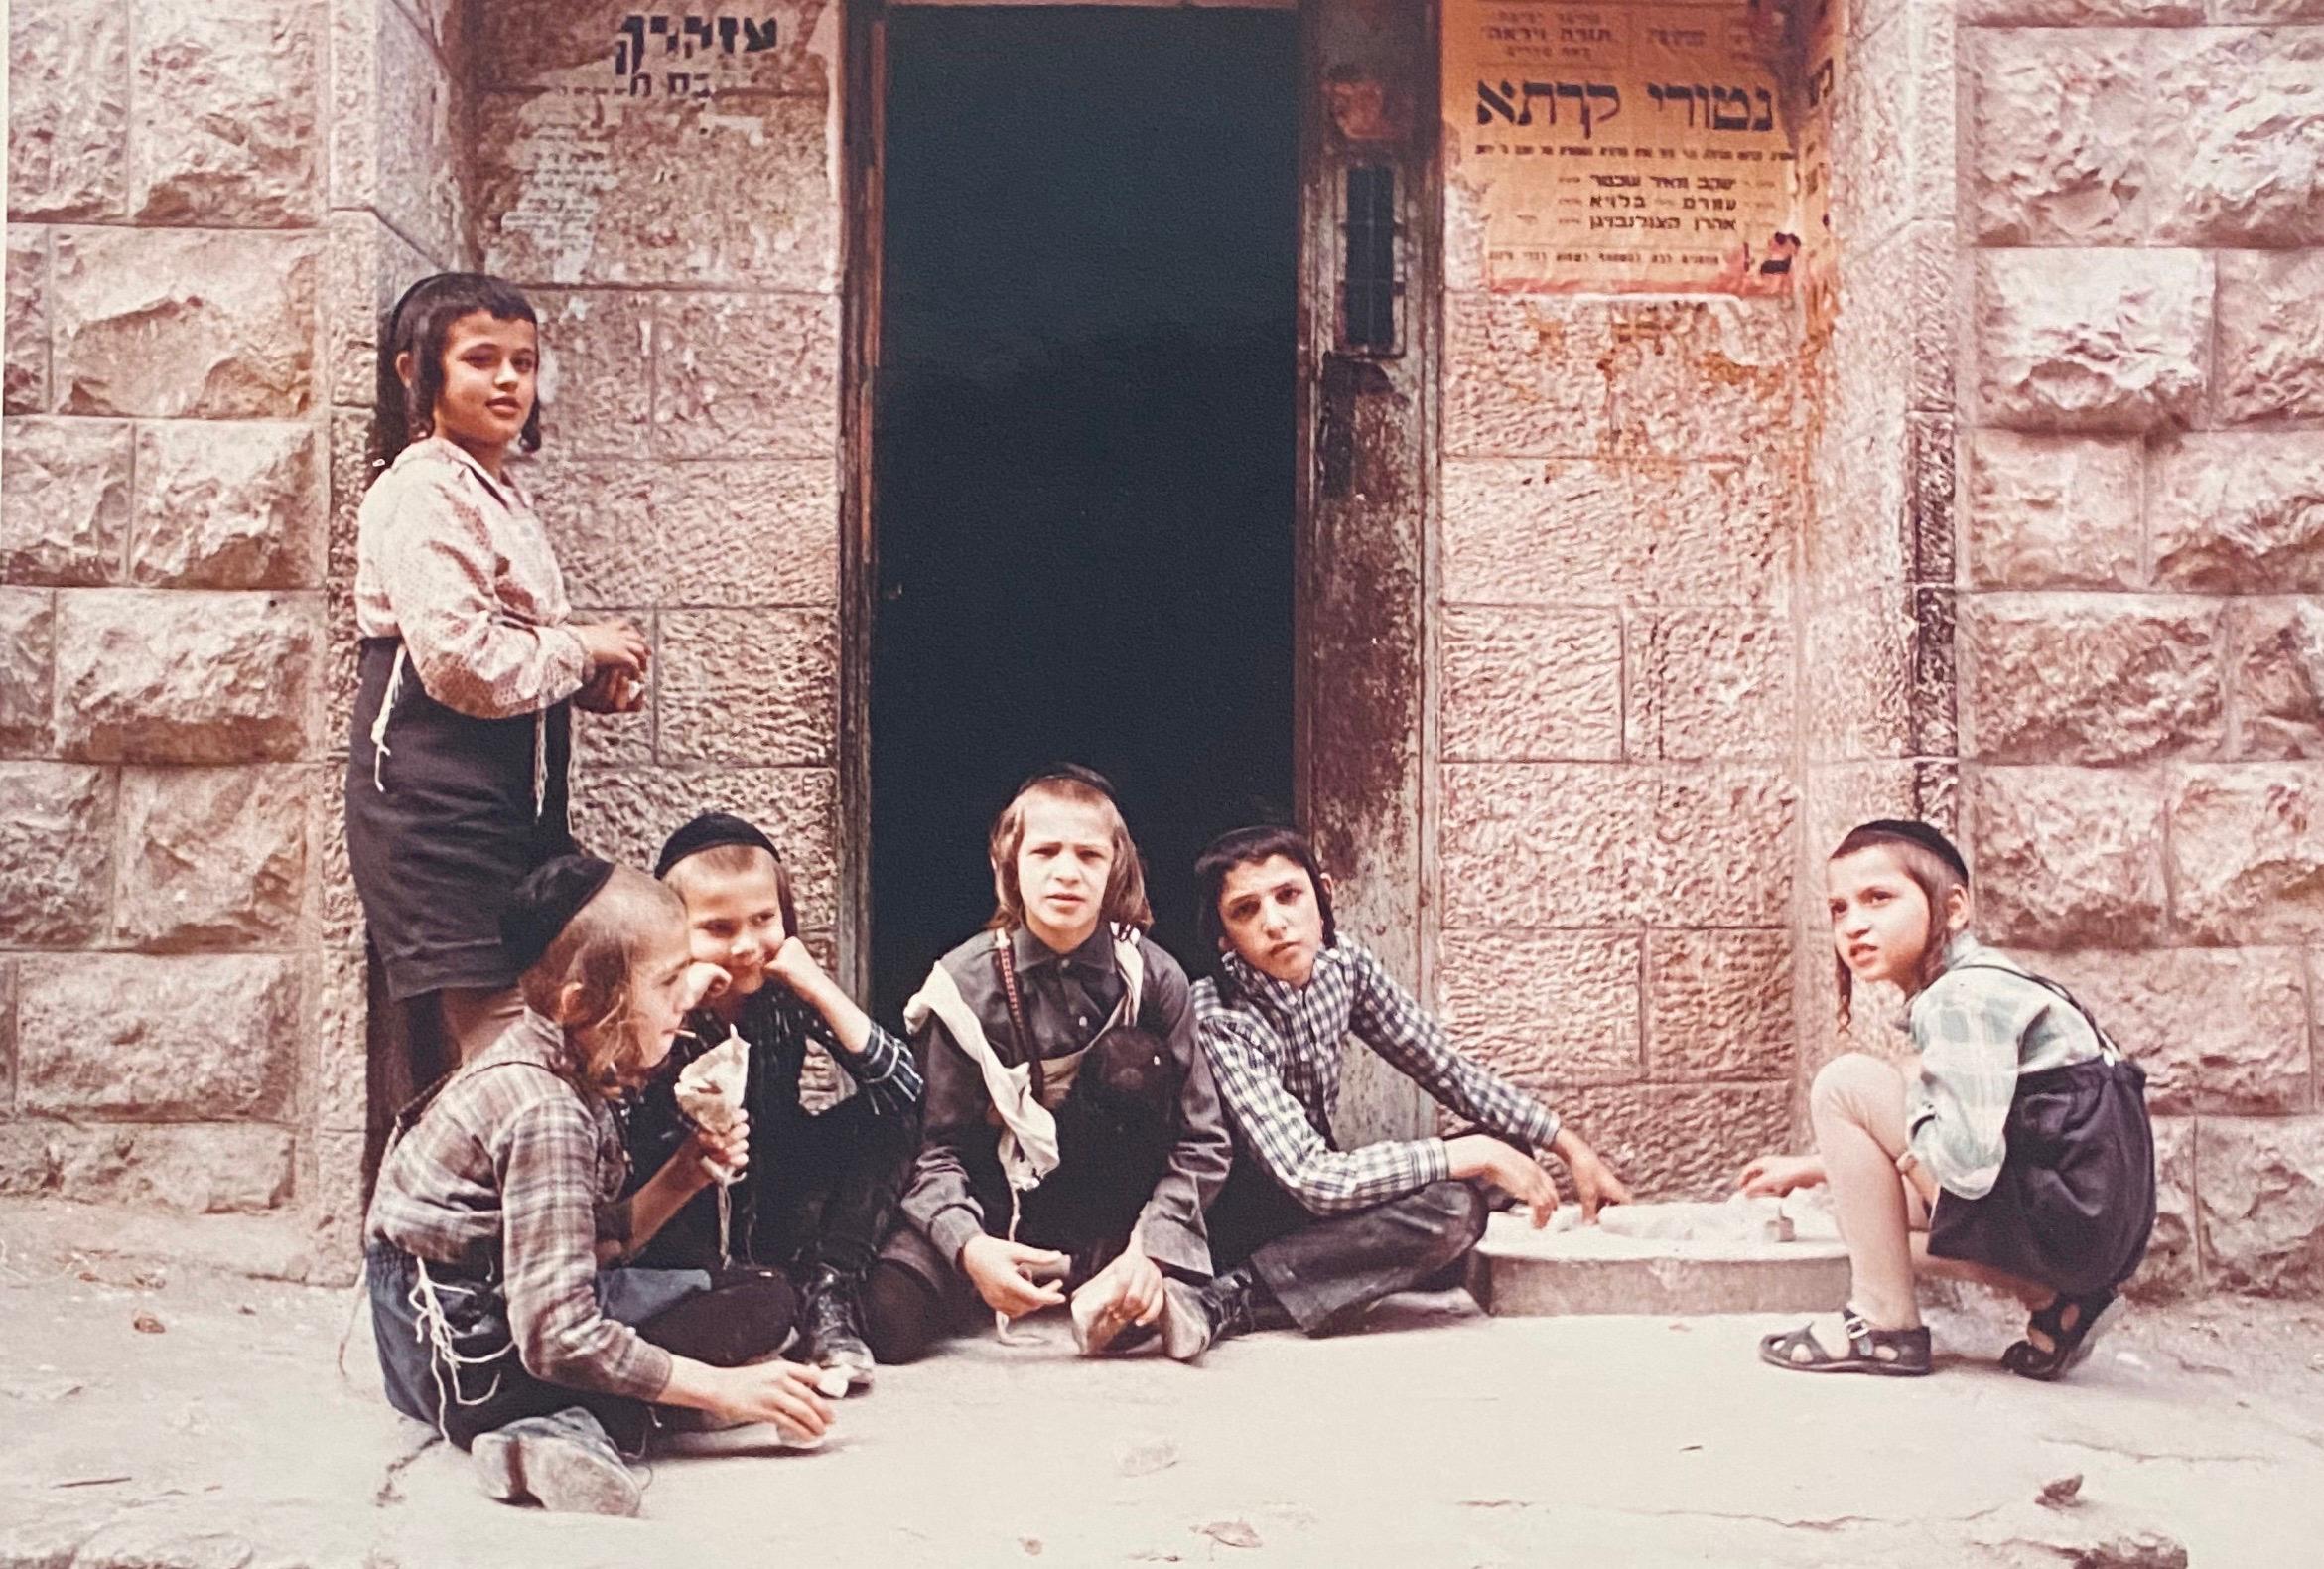 Unknown Color Photograph - Colored Photograph Of Nerturei Karta Children Playing 